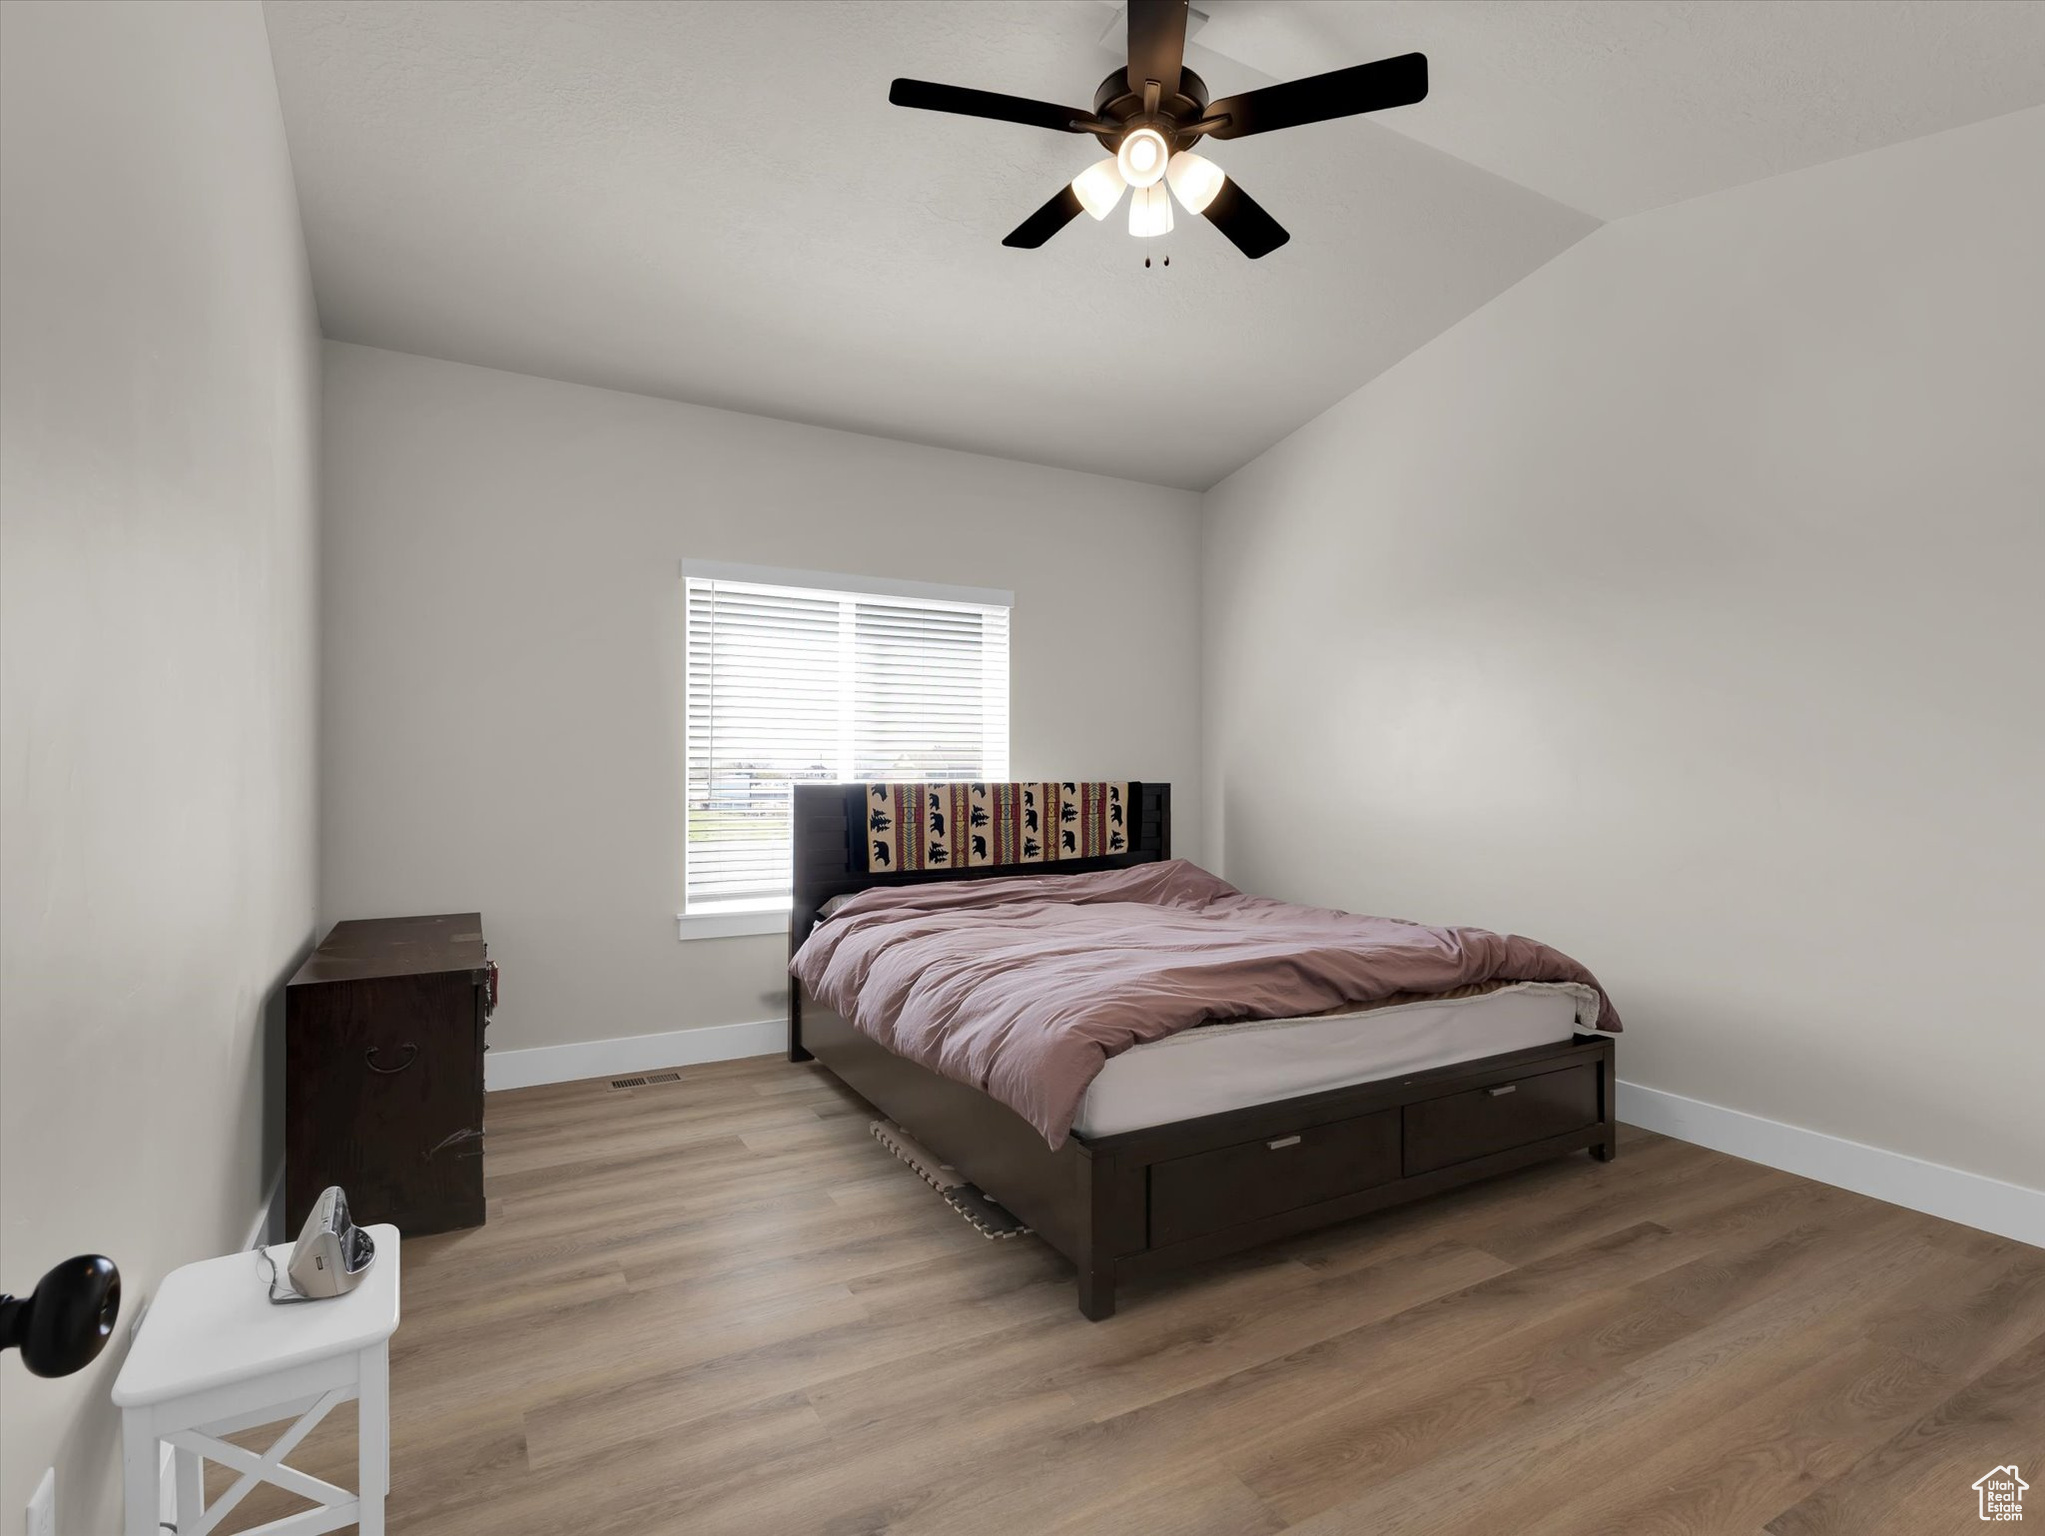 Bedroom with light hardwood / wood-style flooring, ceiling fan, and lofted ceiling